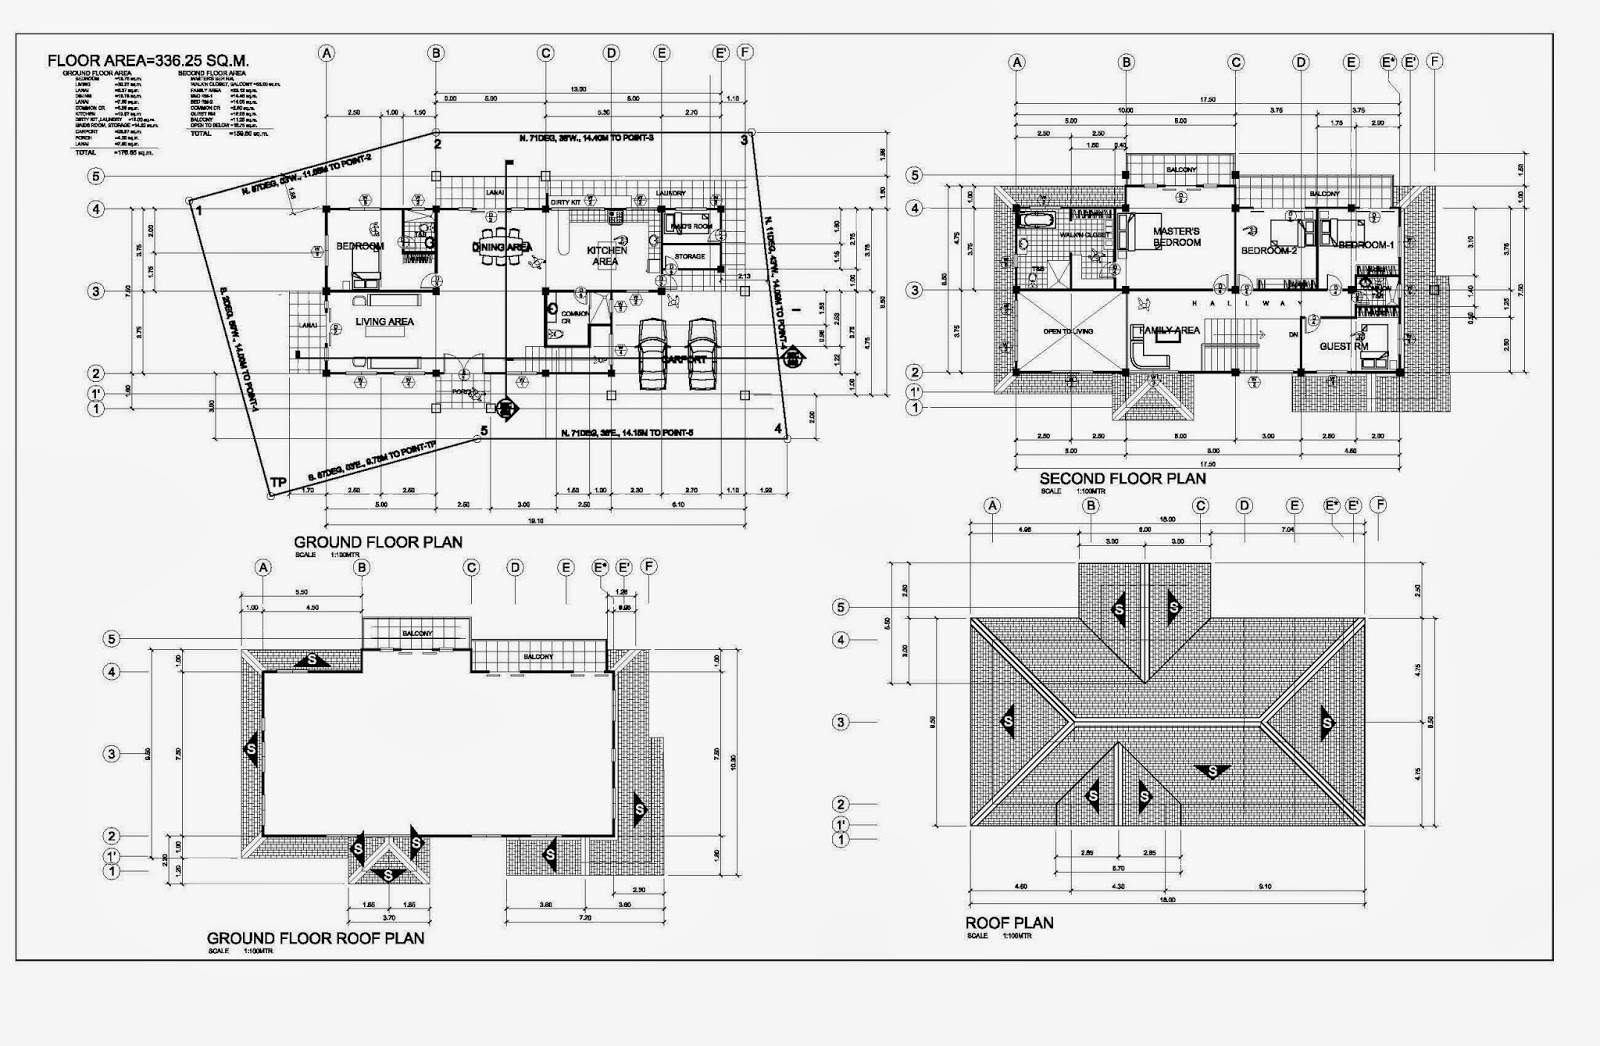 Architectural Planning For Good Construction: Architectural Plan